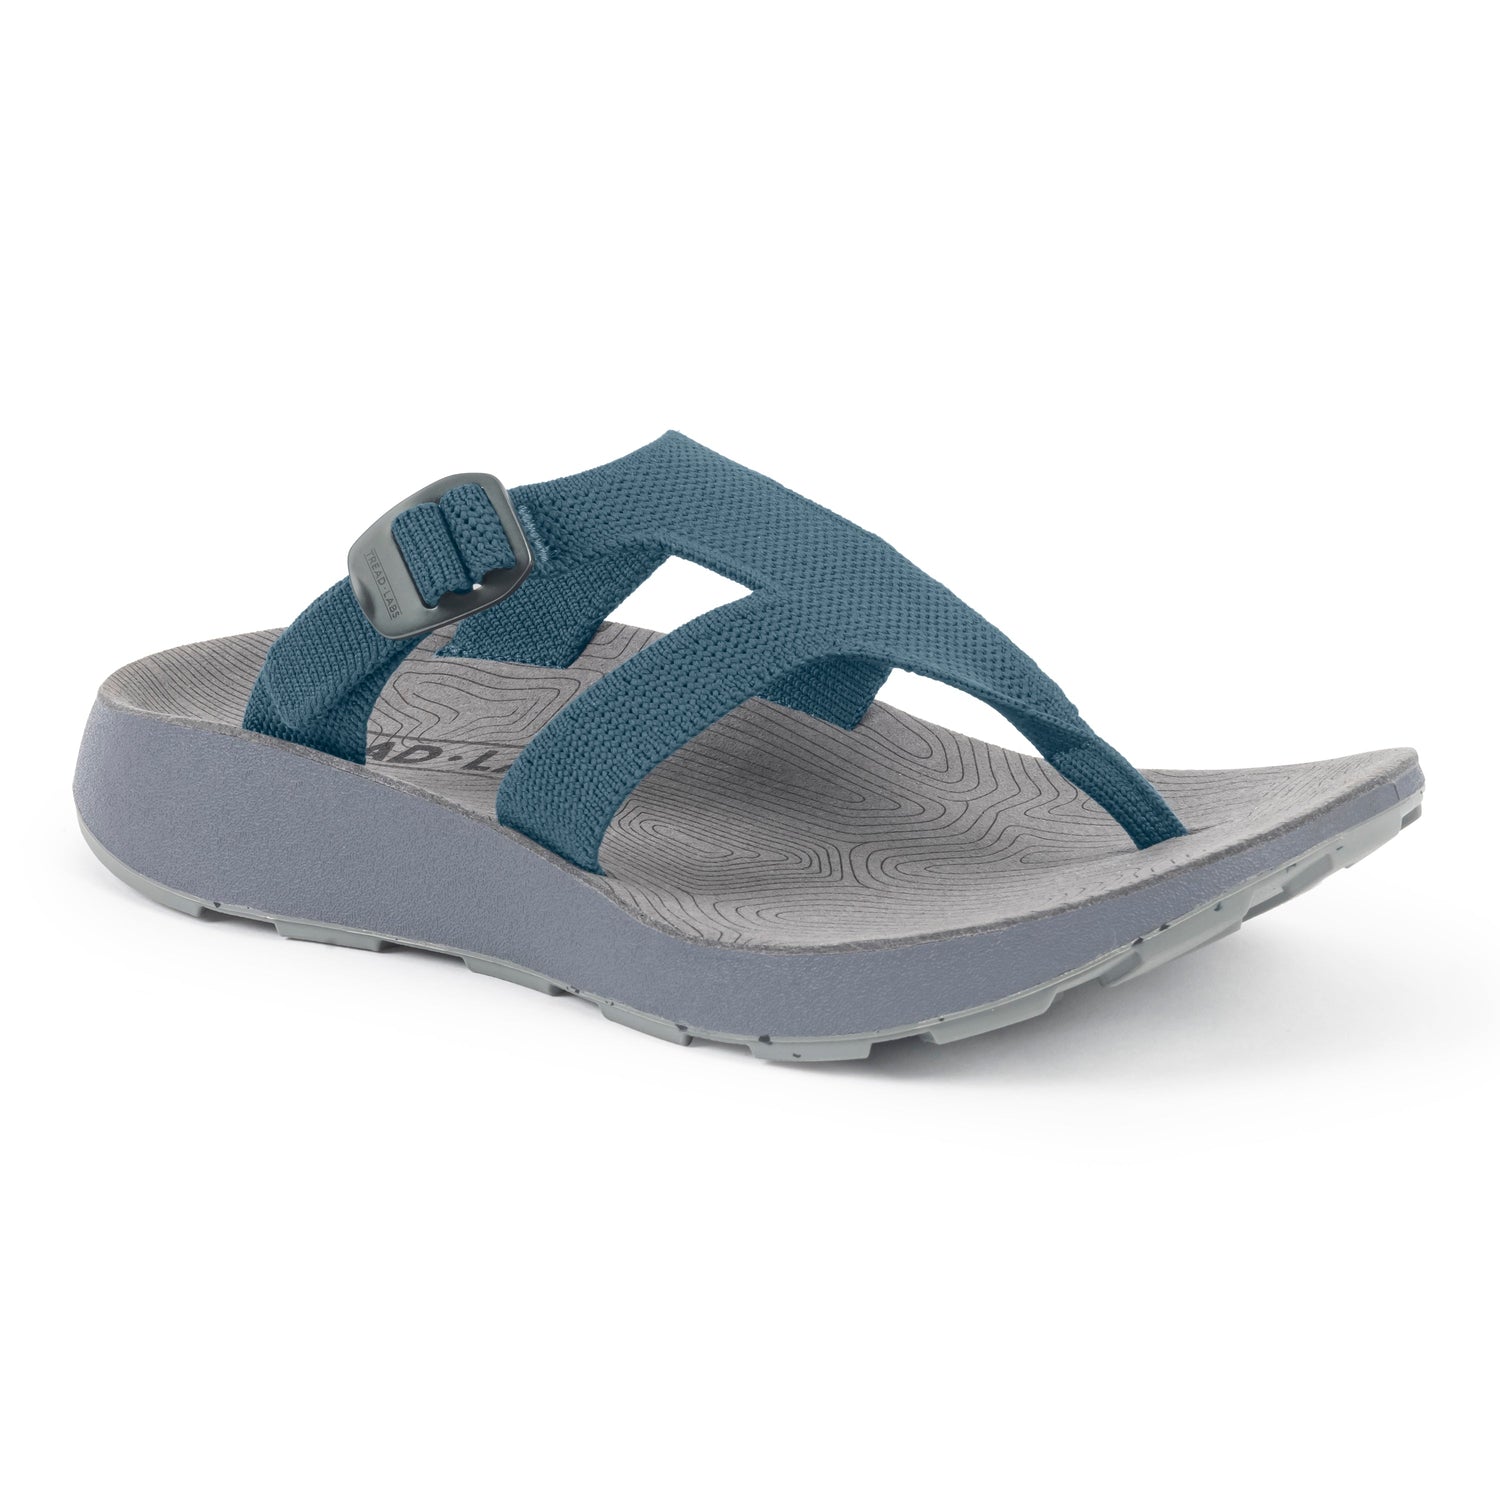 Discontinued Sandals